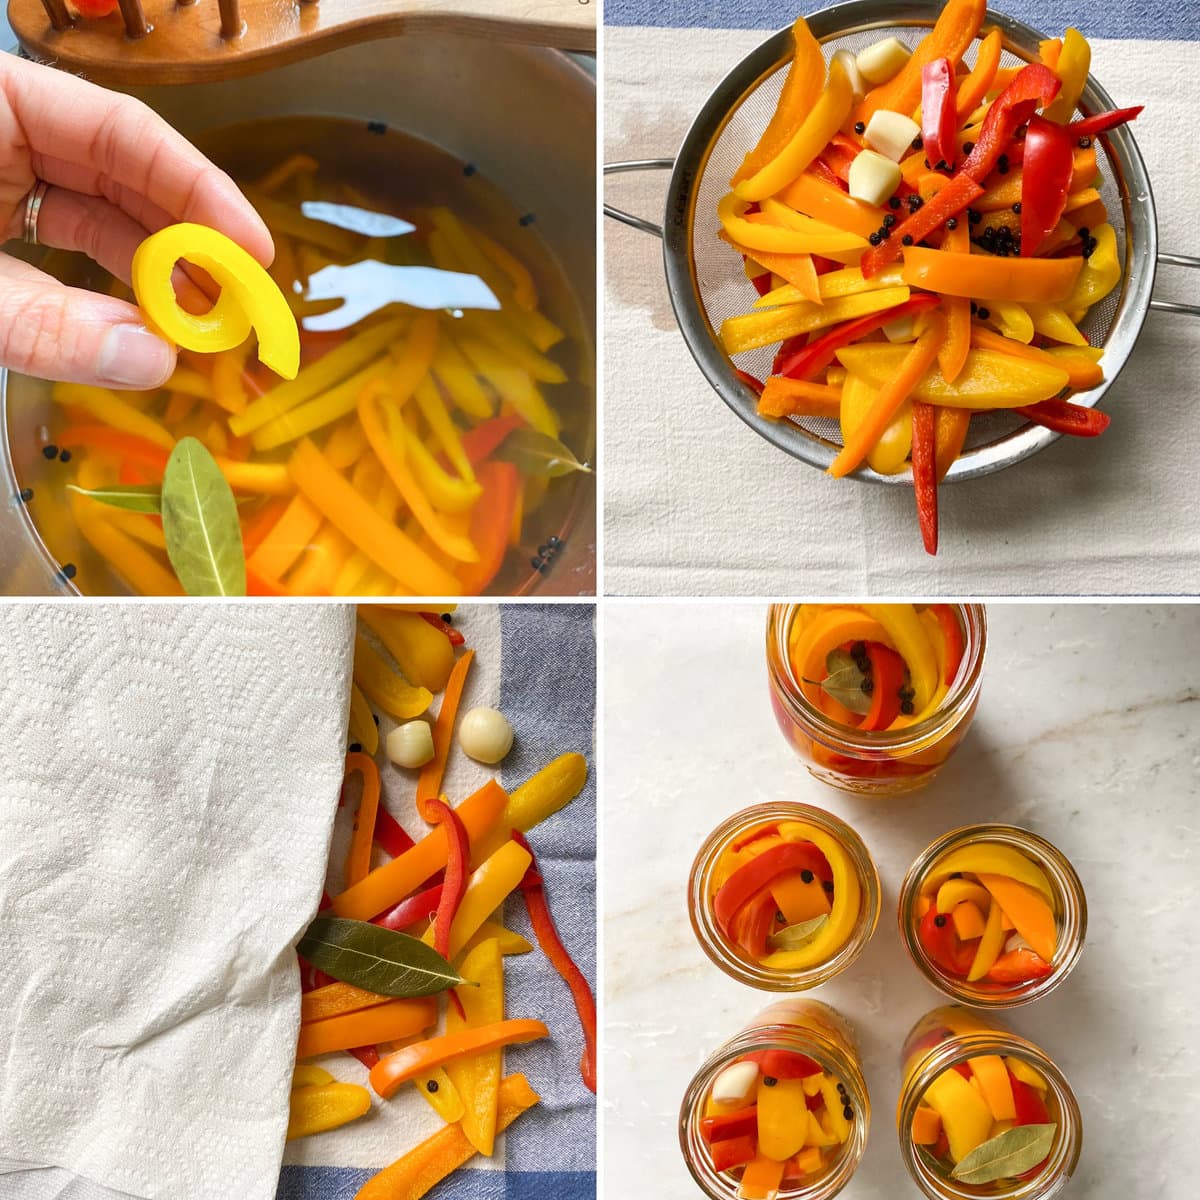 How to make Italian vinegar peppers step by step. Boiling and jarring the peppers.